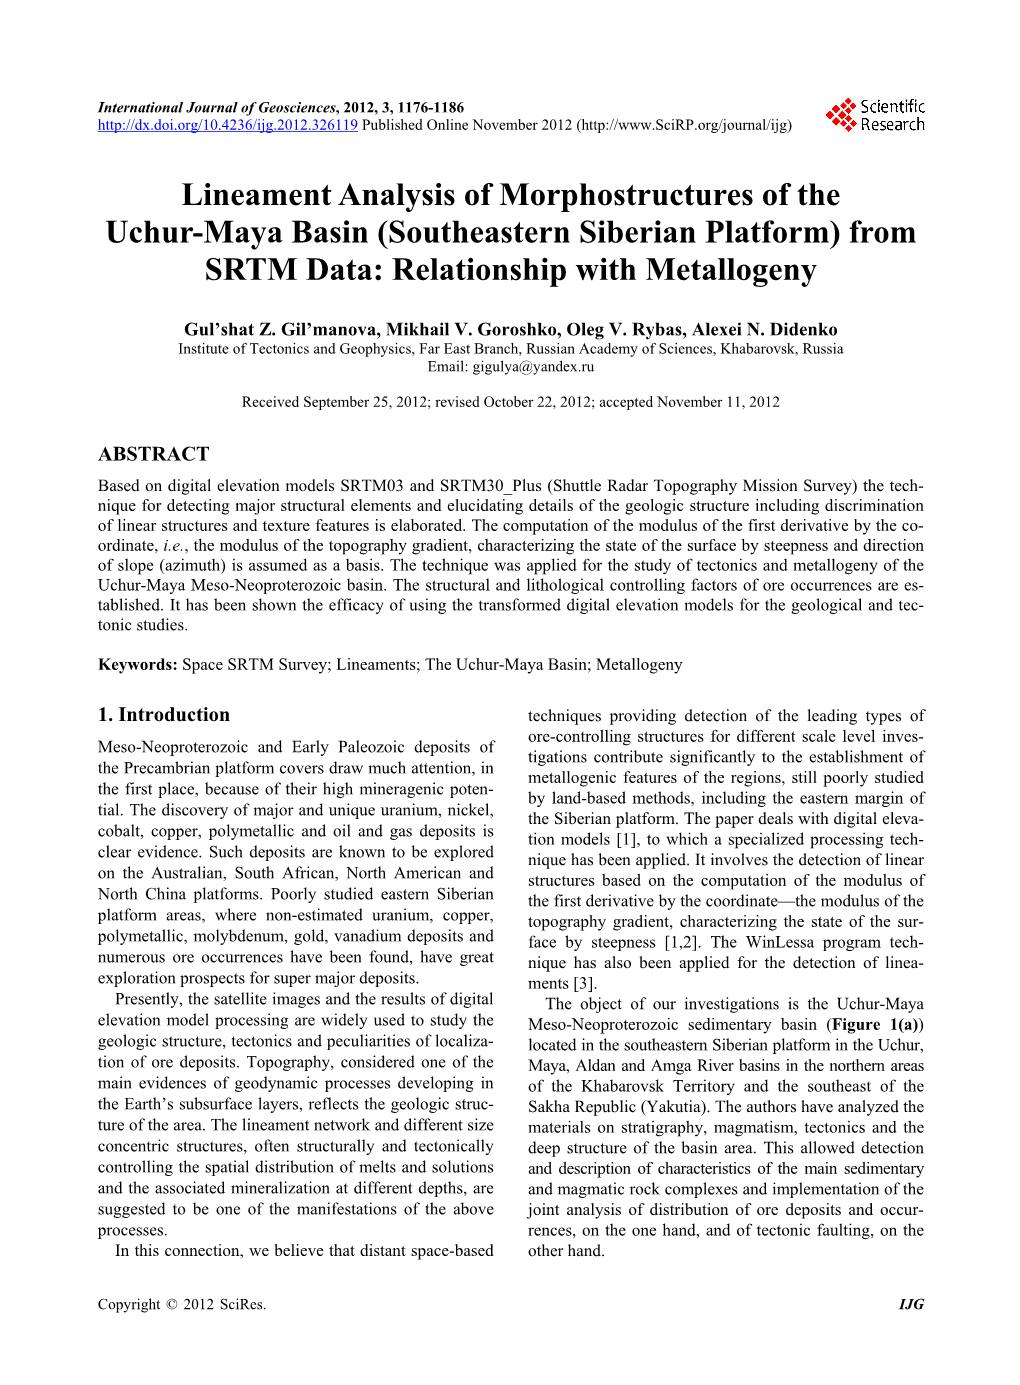 Lineament Analysis of Morphostructures of the Uchur-Maya Basin (Southeastern Siberian Platform) from SRTM Data: Relationship with Metallogeny